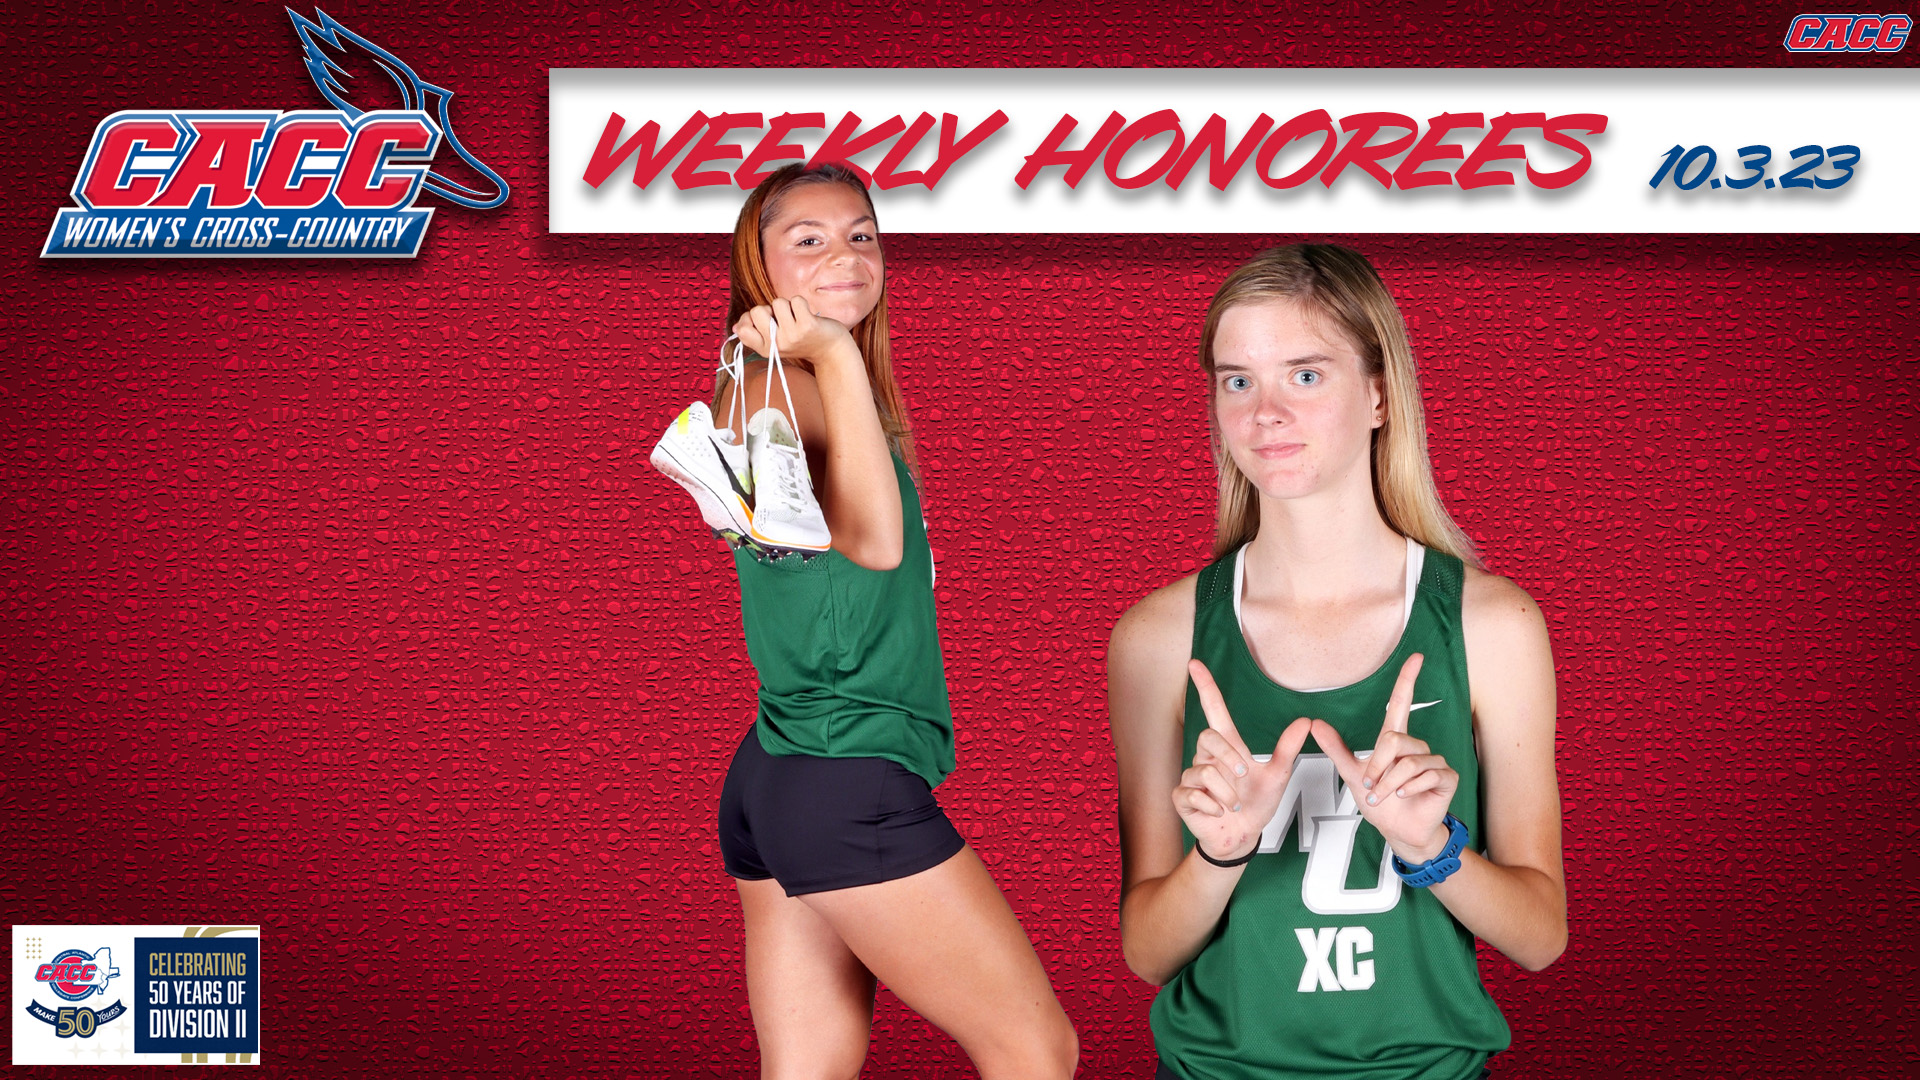 CACC Women's Cross Country Weekly Honorees (10-3-23)